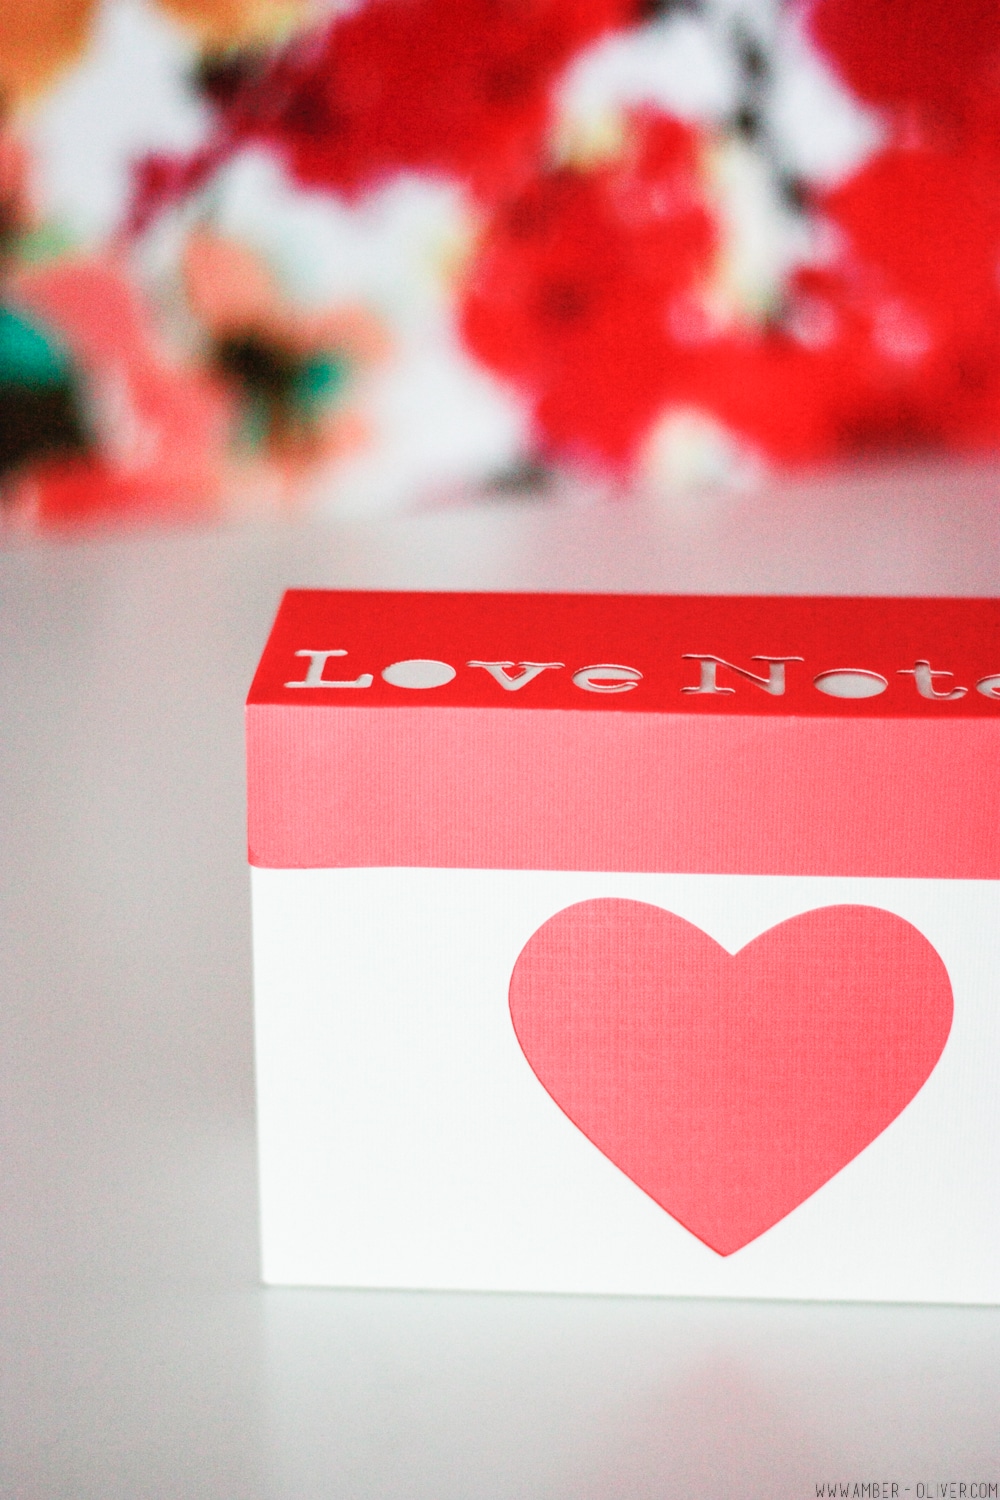 DIY Love Notes Box made using the Cricut Explore Air 2! A perfect Valentine's Day Project! #CricutMade #sponsoredDIY Love Notes Box made using the Cricut Explore Air 2! A perfect Valentine's Day Project! #CricutMade #sponsored